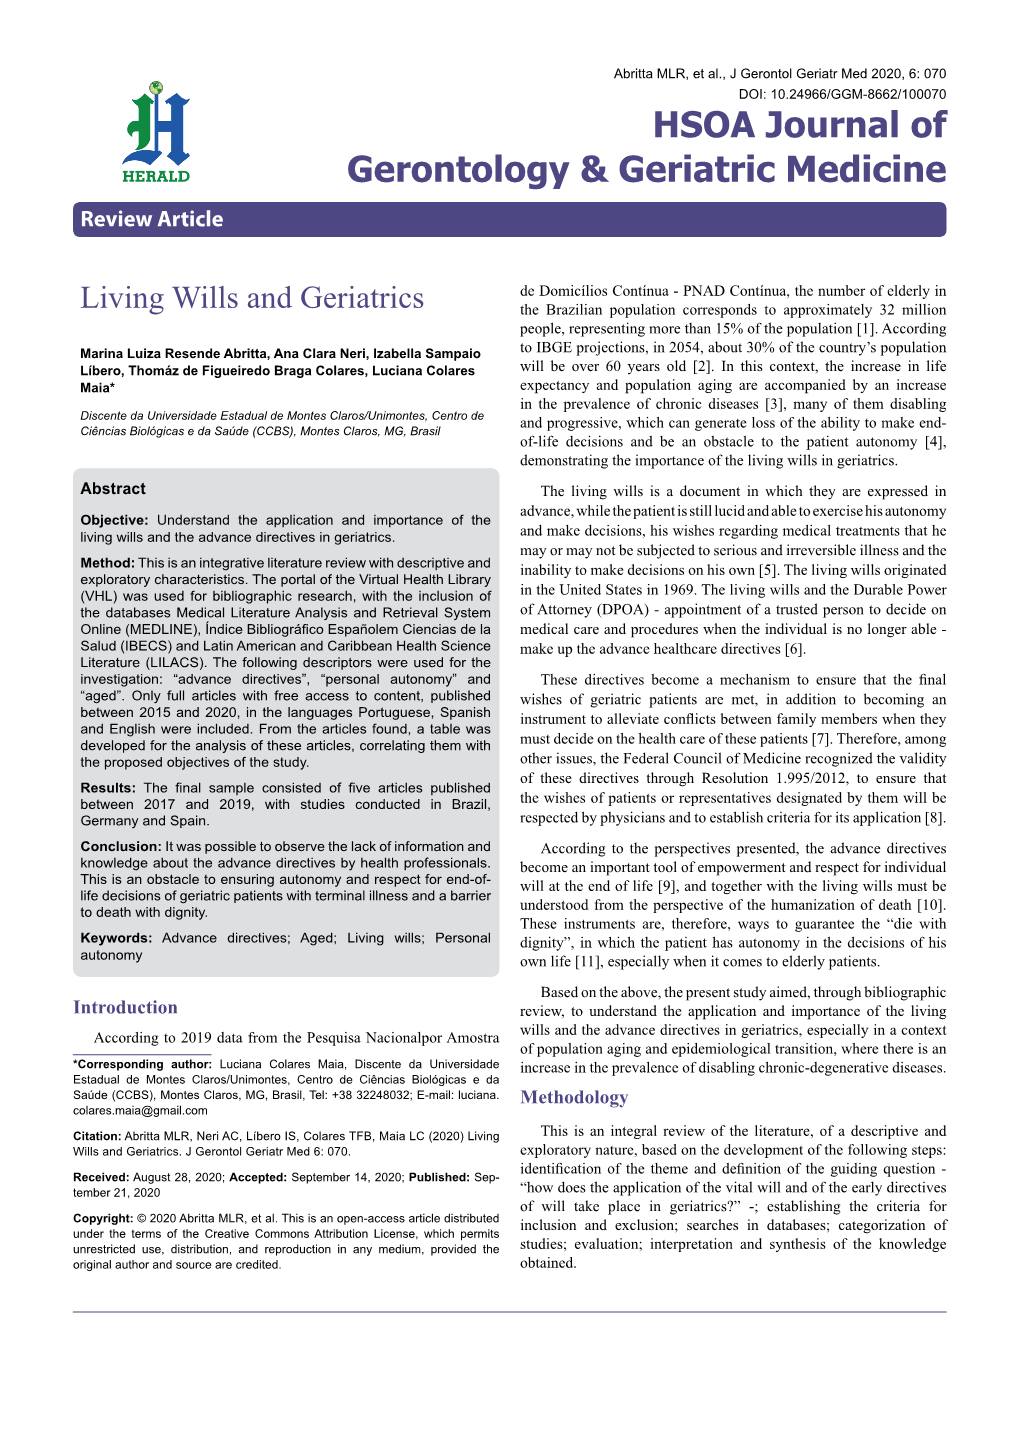 Living Wills and Geriatrics the Brazilian Population Corresponds to Approximately 32 Million People, Representing More Than 15% of the Population [1]